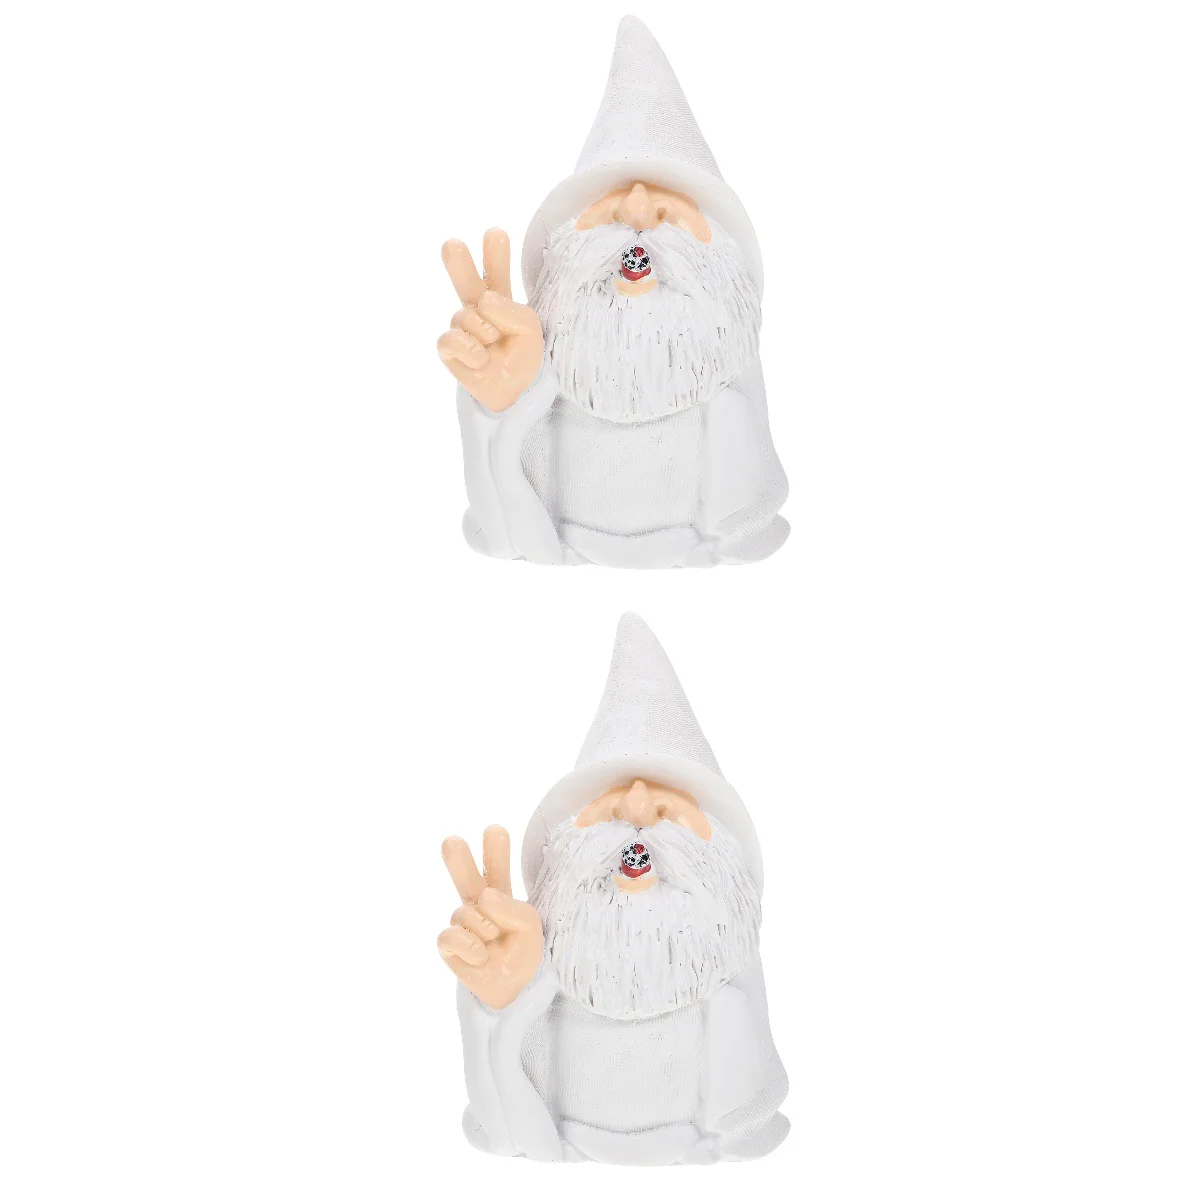 

Gnome Statue Sculpture Garden Dwarf Guest Resin Greeter Lawn Ornament White Porch Front Christmas Sign Crafts Patio Elf Fig